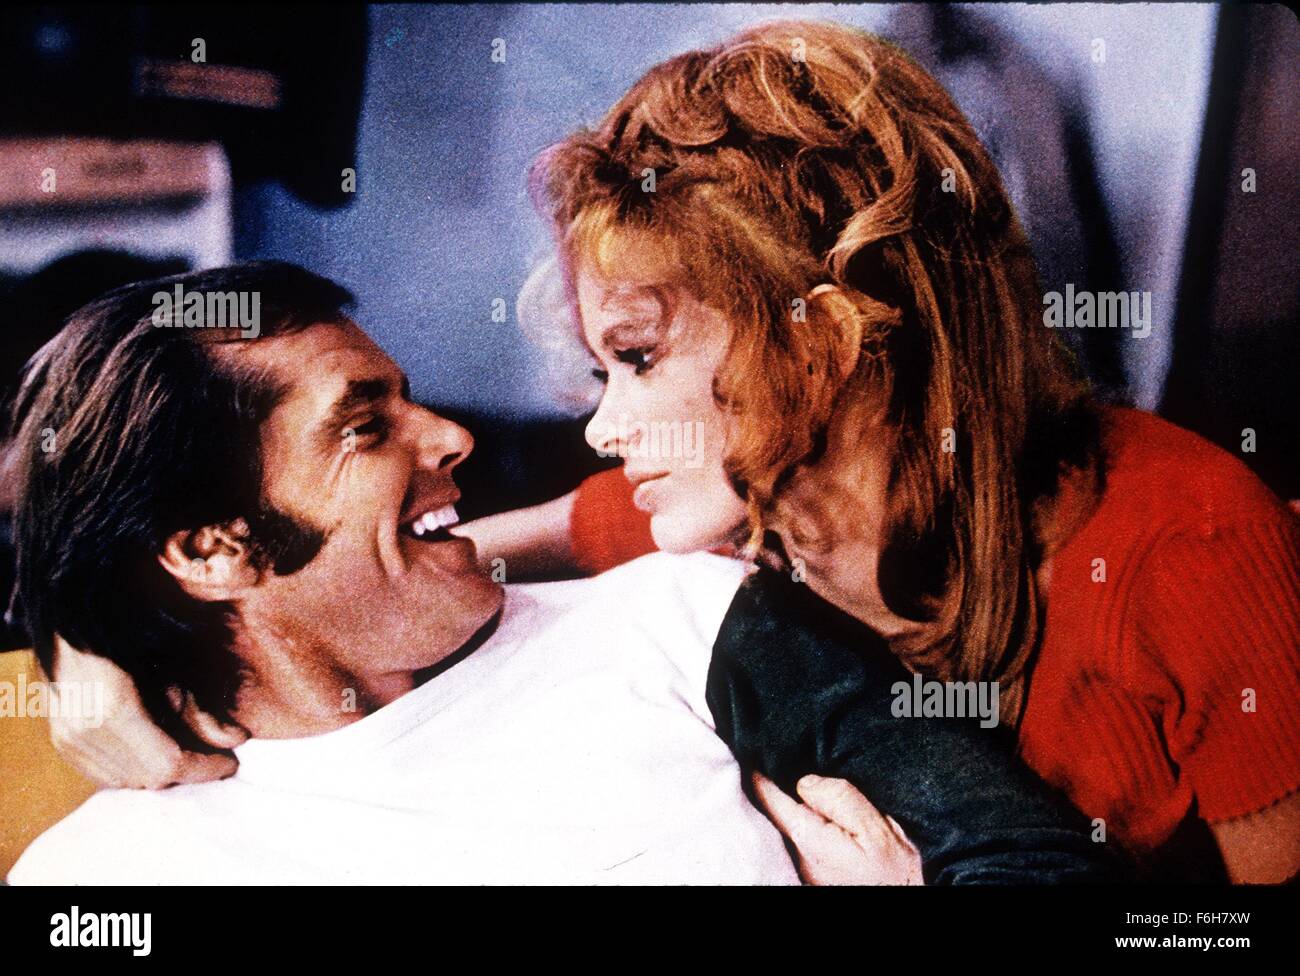 1970, Film Title: FIVE EASY PIECES, Director: BOB RAFELSON, Pictured: KAREN BLACK, JACK NICHOLSON, INTIMATE, GRUNGY, LAUGHING, SMILING, EMBRACE, RECLINING. (Credit Image: SNAP) Stock Photo